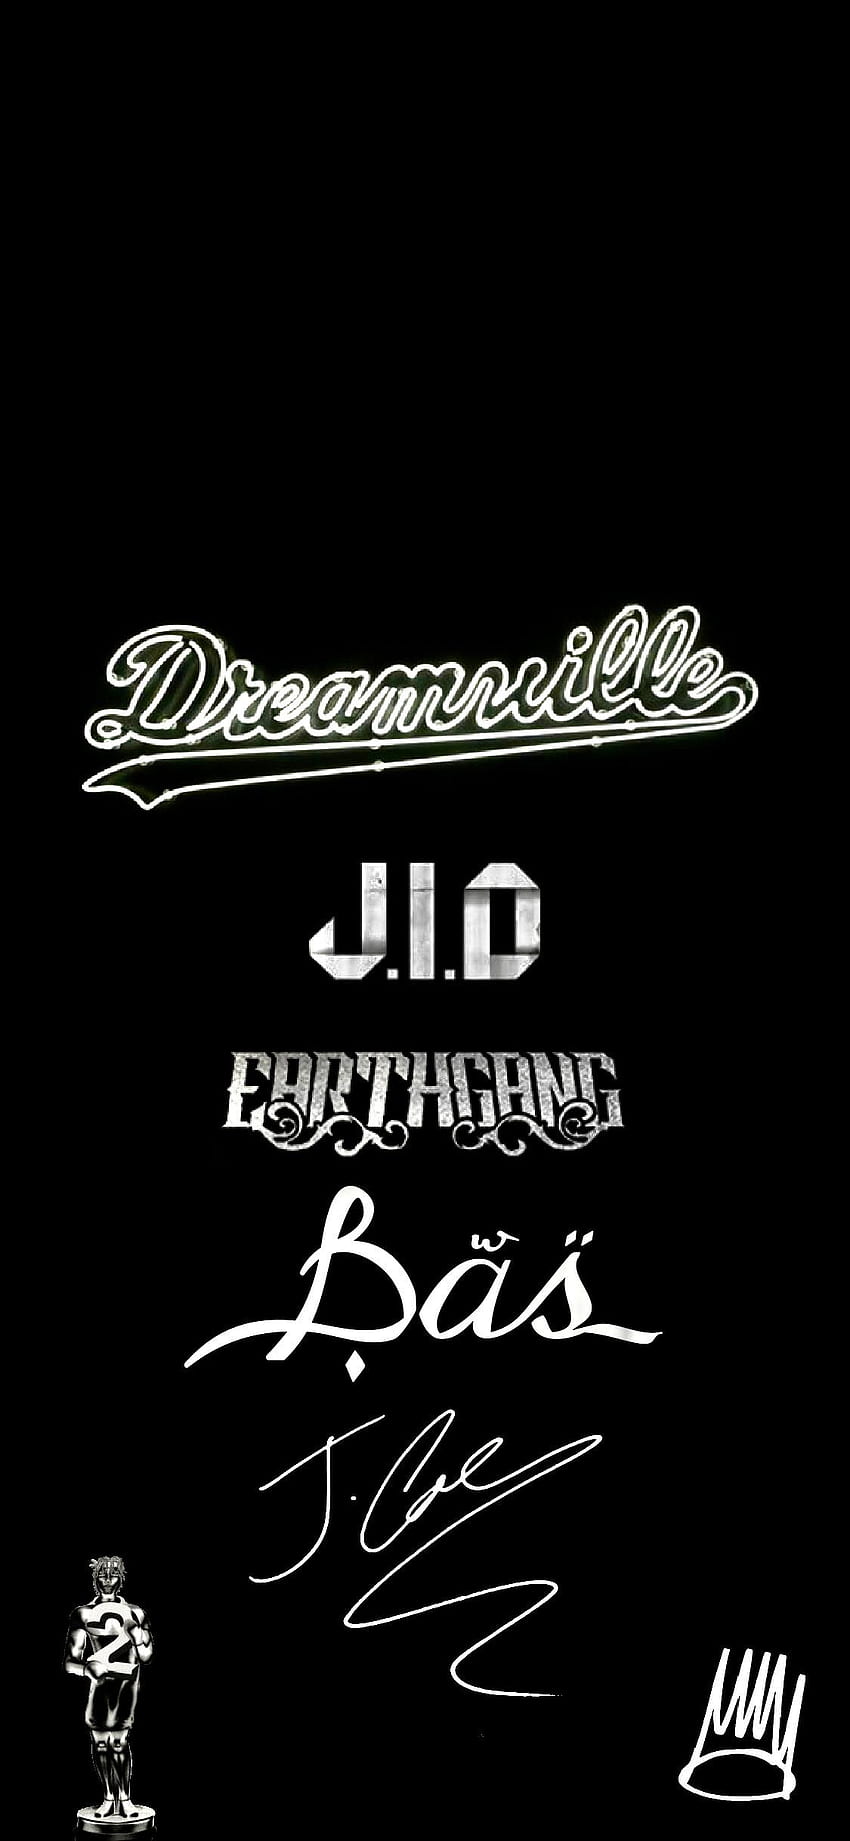 FIXED Dreamville, J. Cole, Bas, JID, and EARTHGANG . : dreamvillerecords, Revenge Of The Dreamers HD phone wallpaper